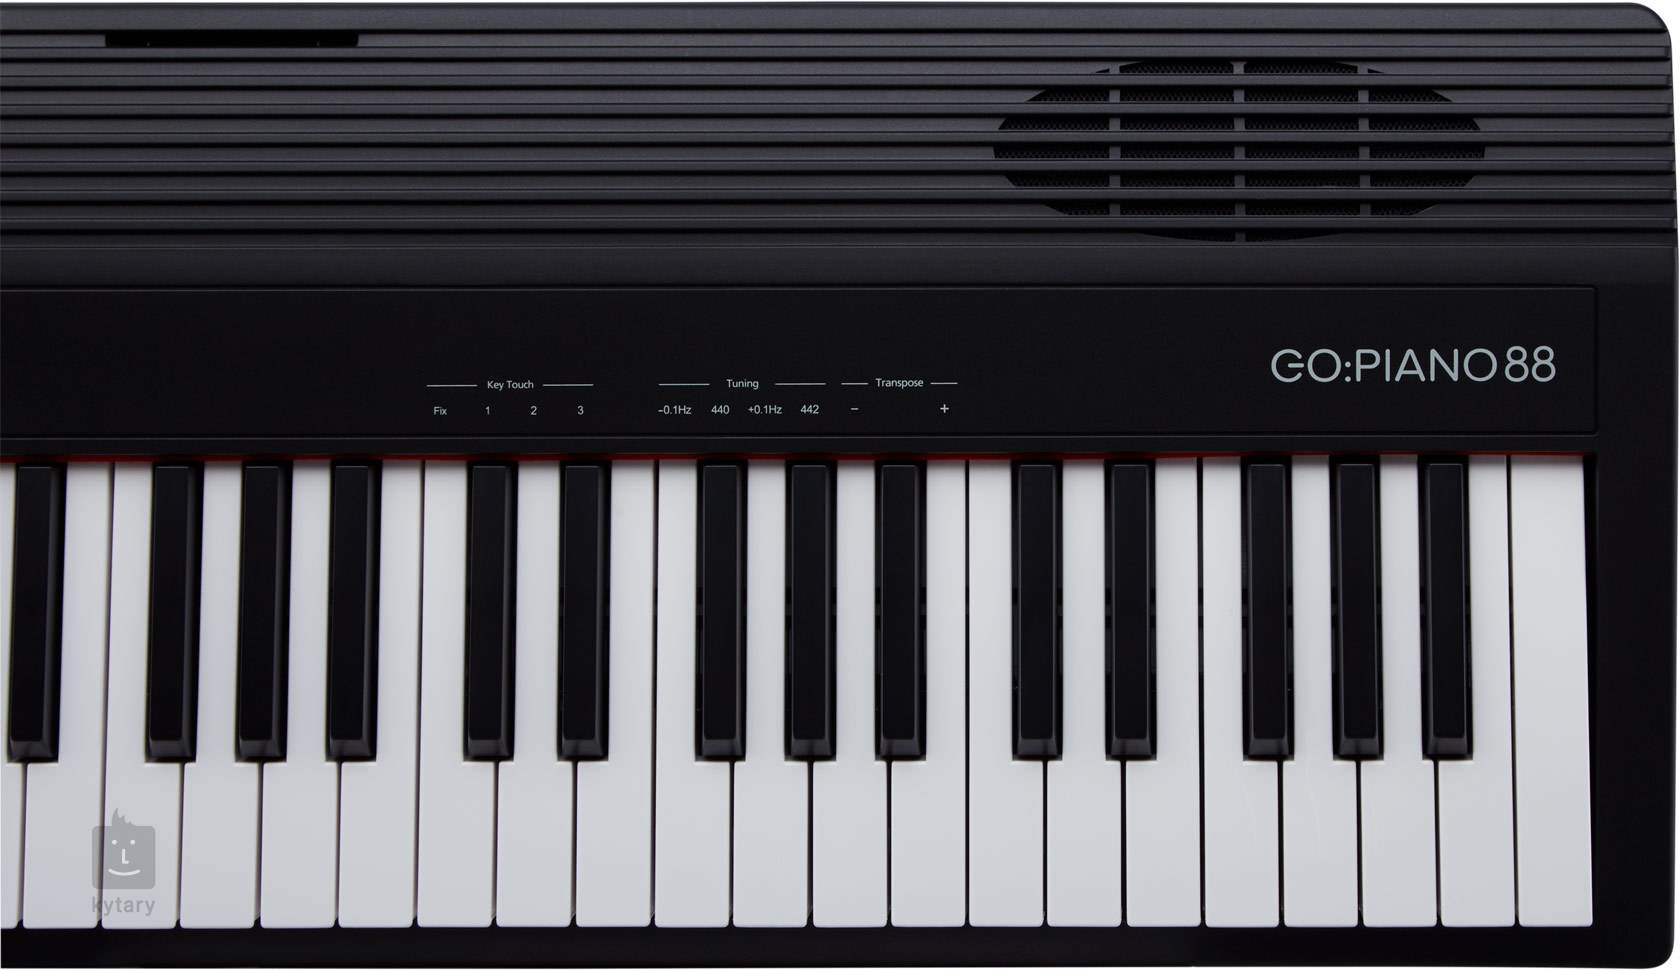 ROLAND GO:PIANO 88 (opened) Keyboard with Touch-Sensitive Keys